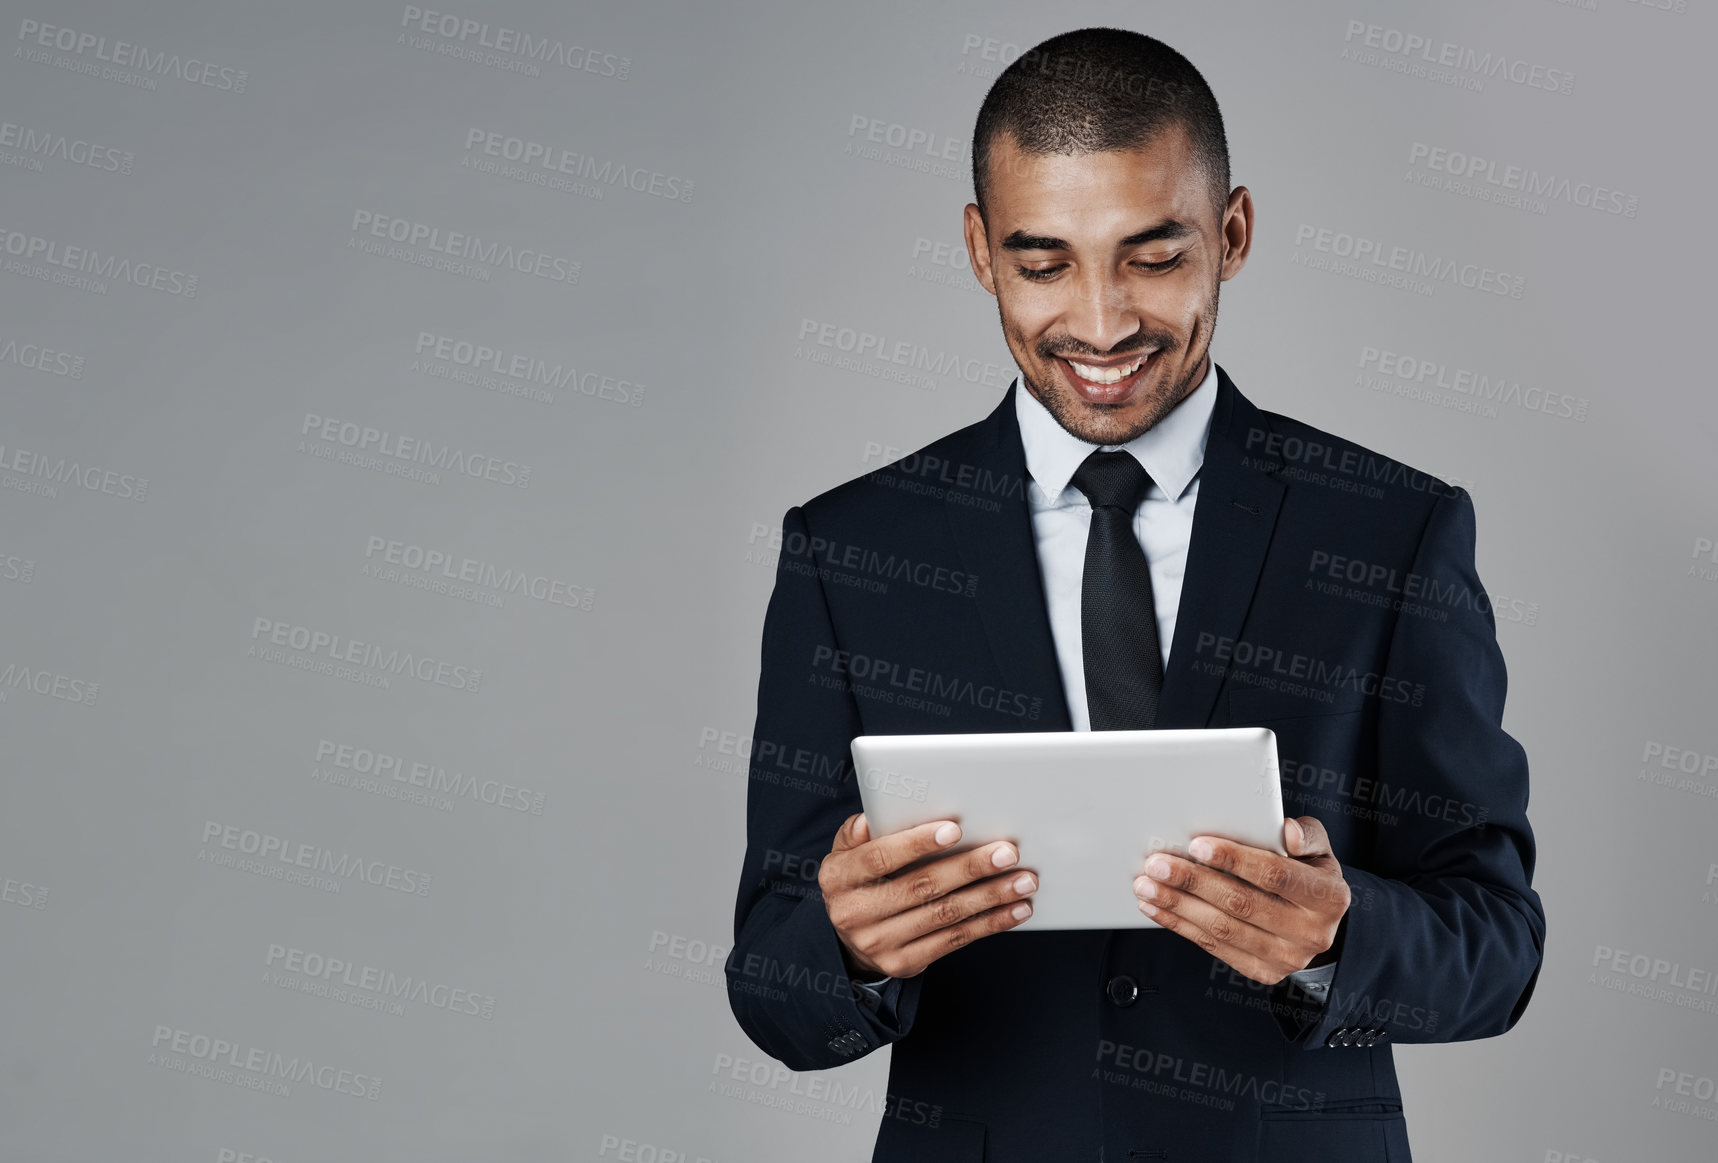 Buy stock photo Studio shot of a corporate businessman using a digital tablet against a grey background